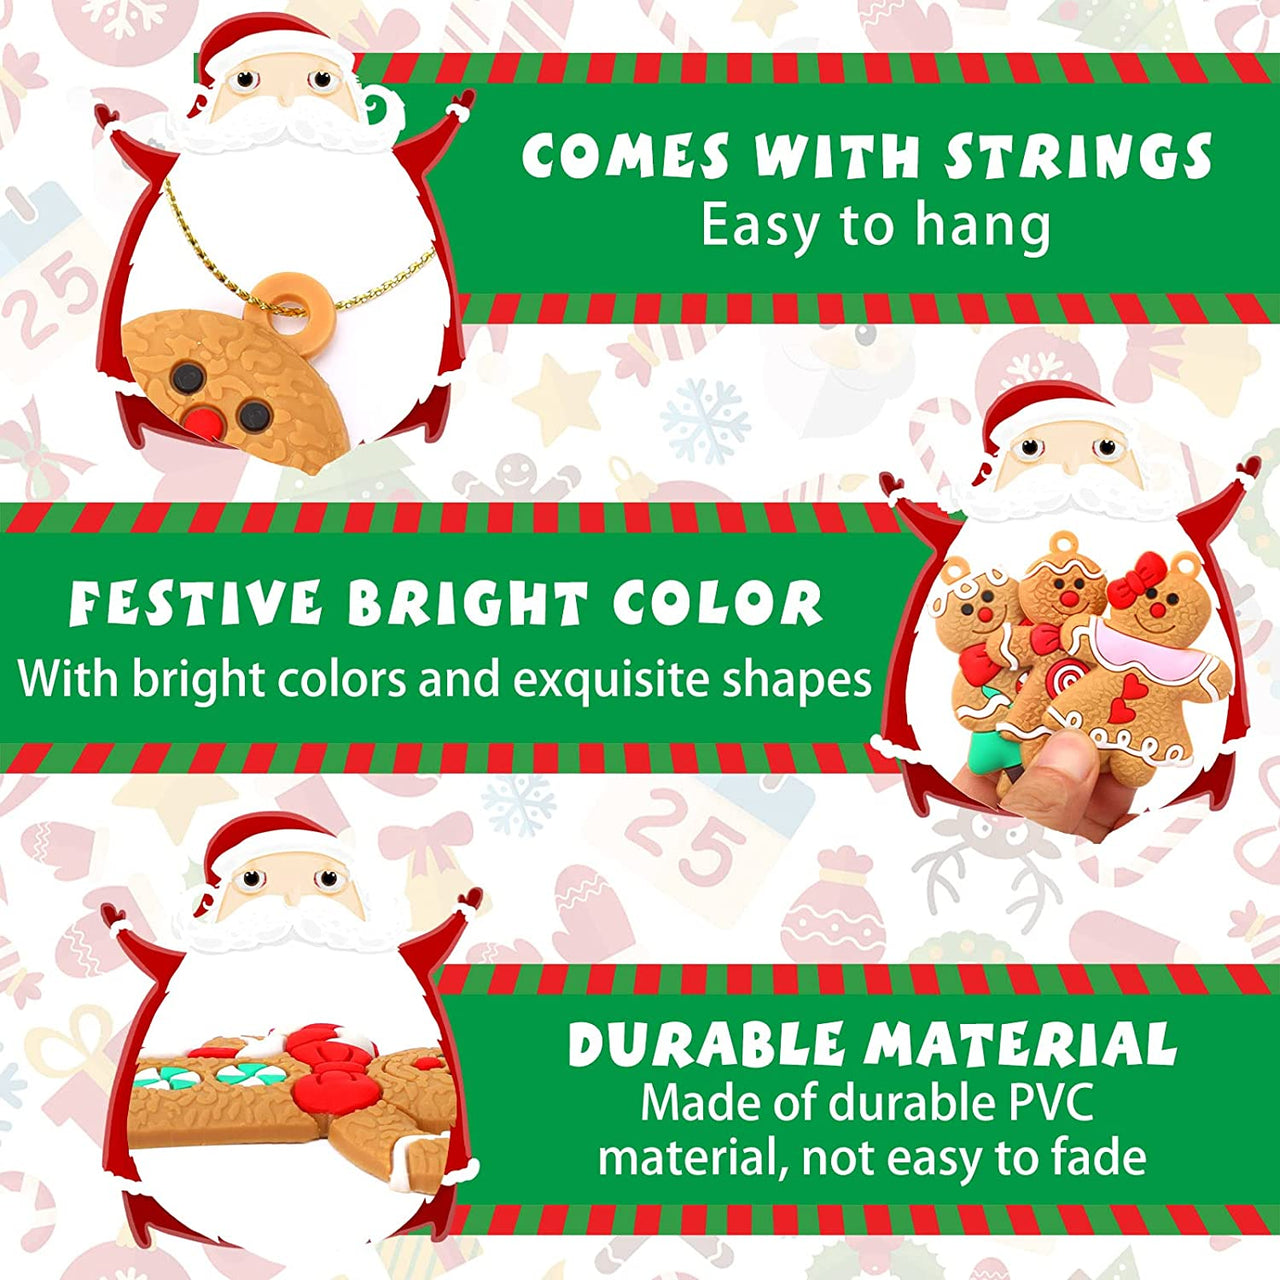 16pcs Gingerbread Man Ornaments Assorted Plastic Gingerbread Figurines Pendants for Christmas Tree Hanging Decorations Holiday Ornament Xmas Decor Party Favors Supplies